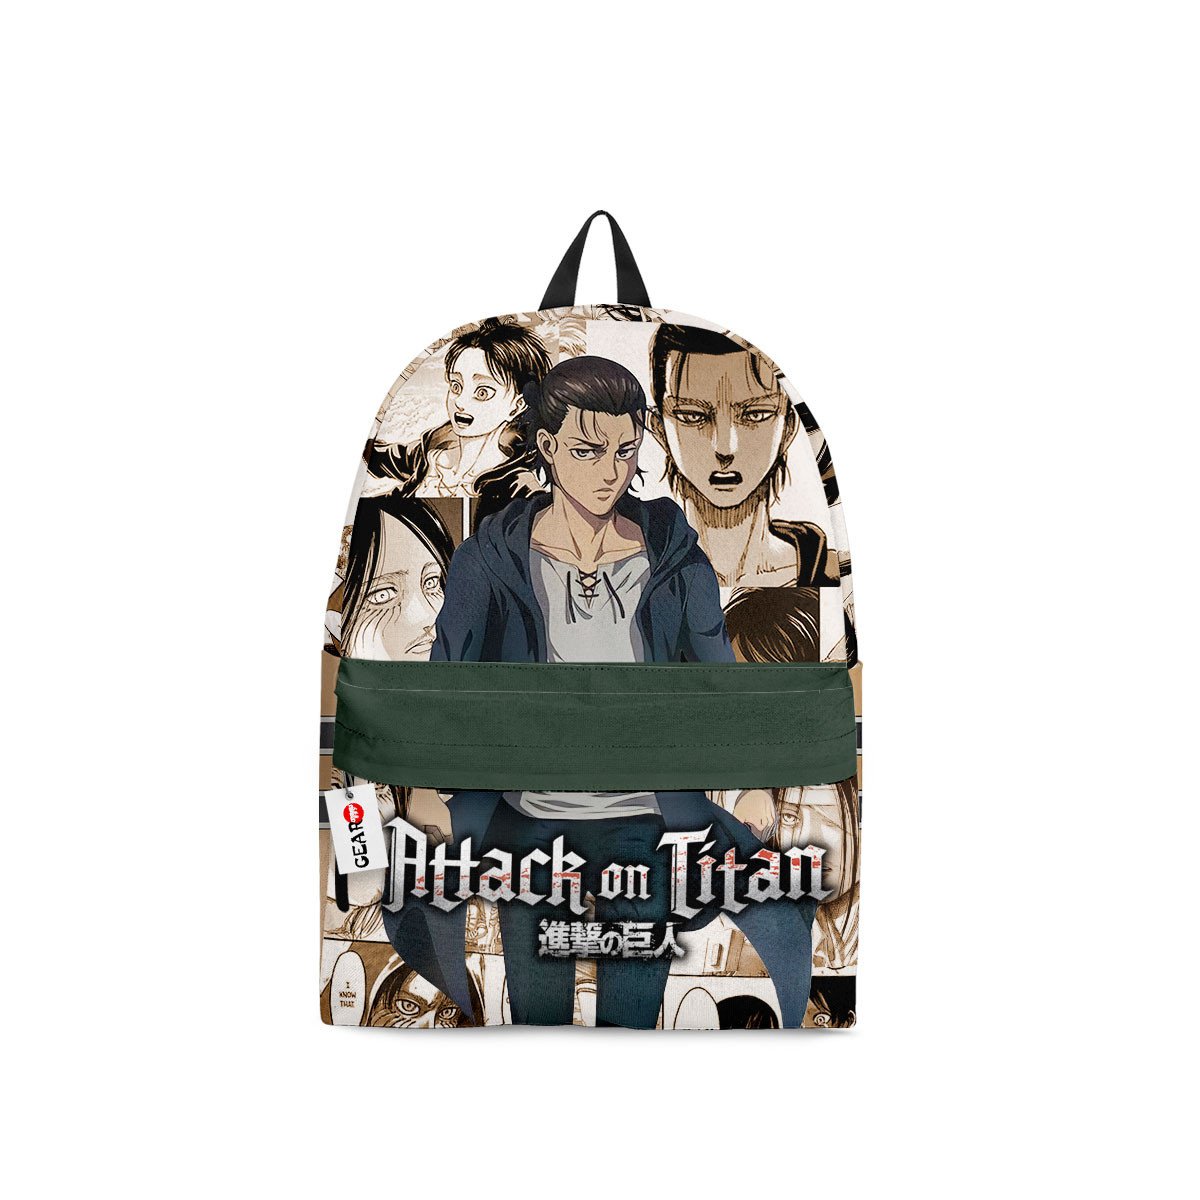 BEST Eren Yeager Attack on Titan Anime Manga Style Printed 3D Leisure Backpack